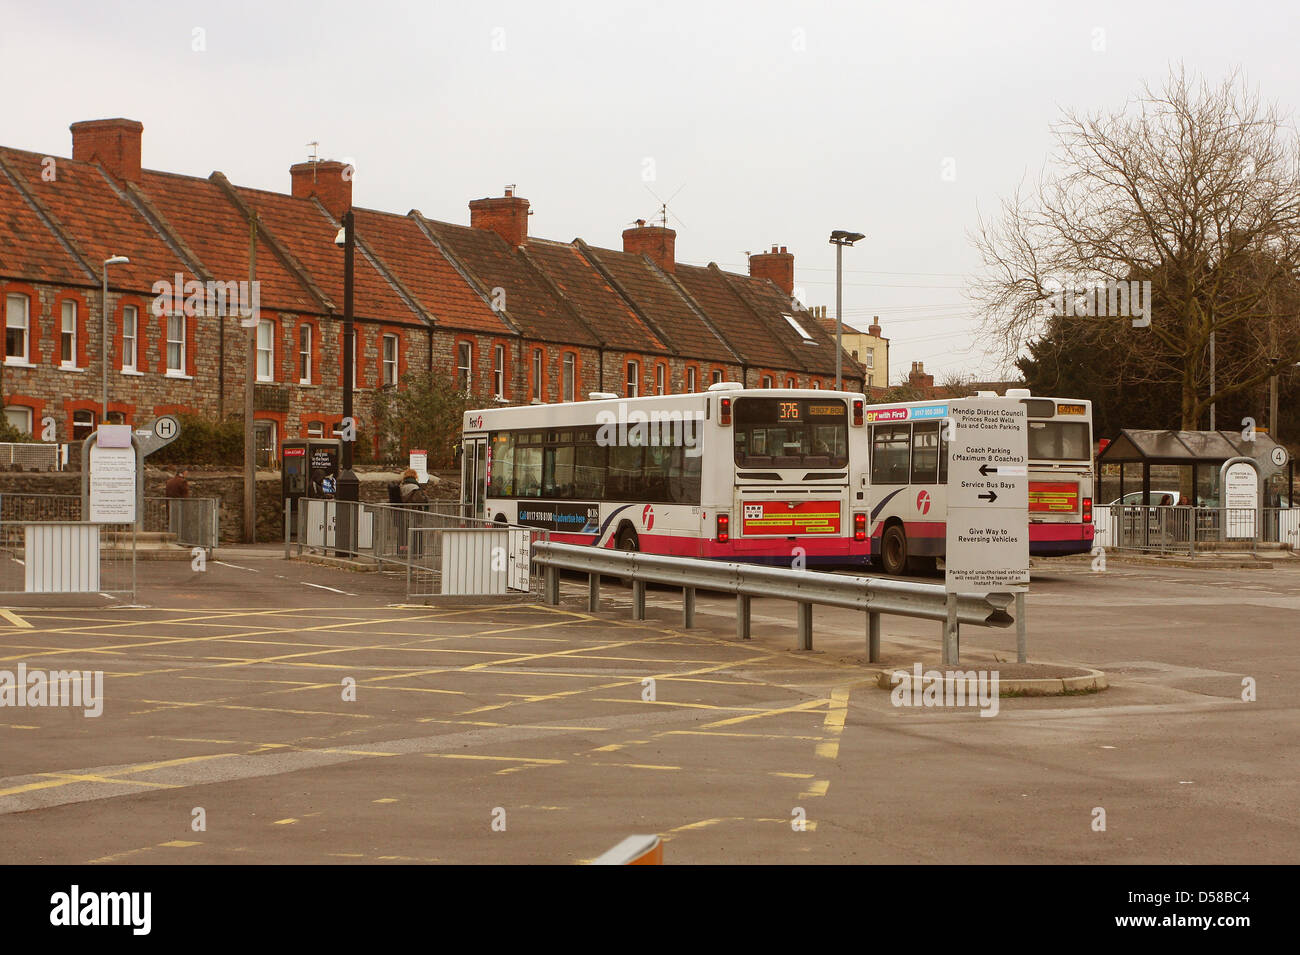 Buses in parking bays in Wells bus station Stock Photo - Alamy